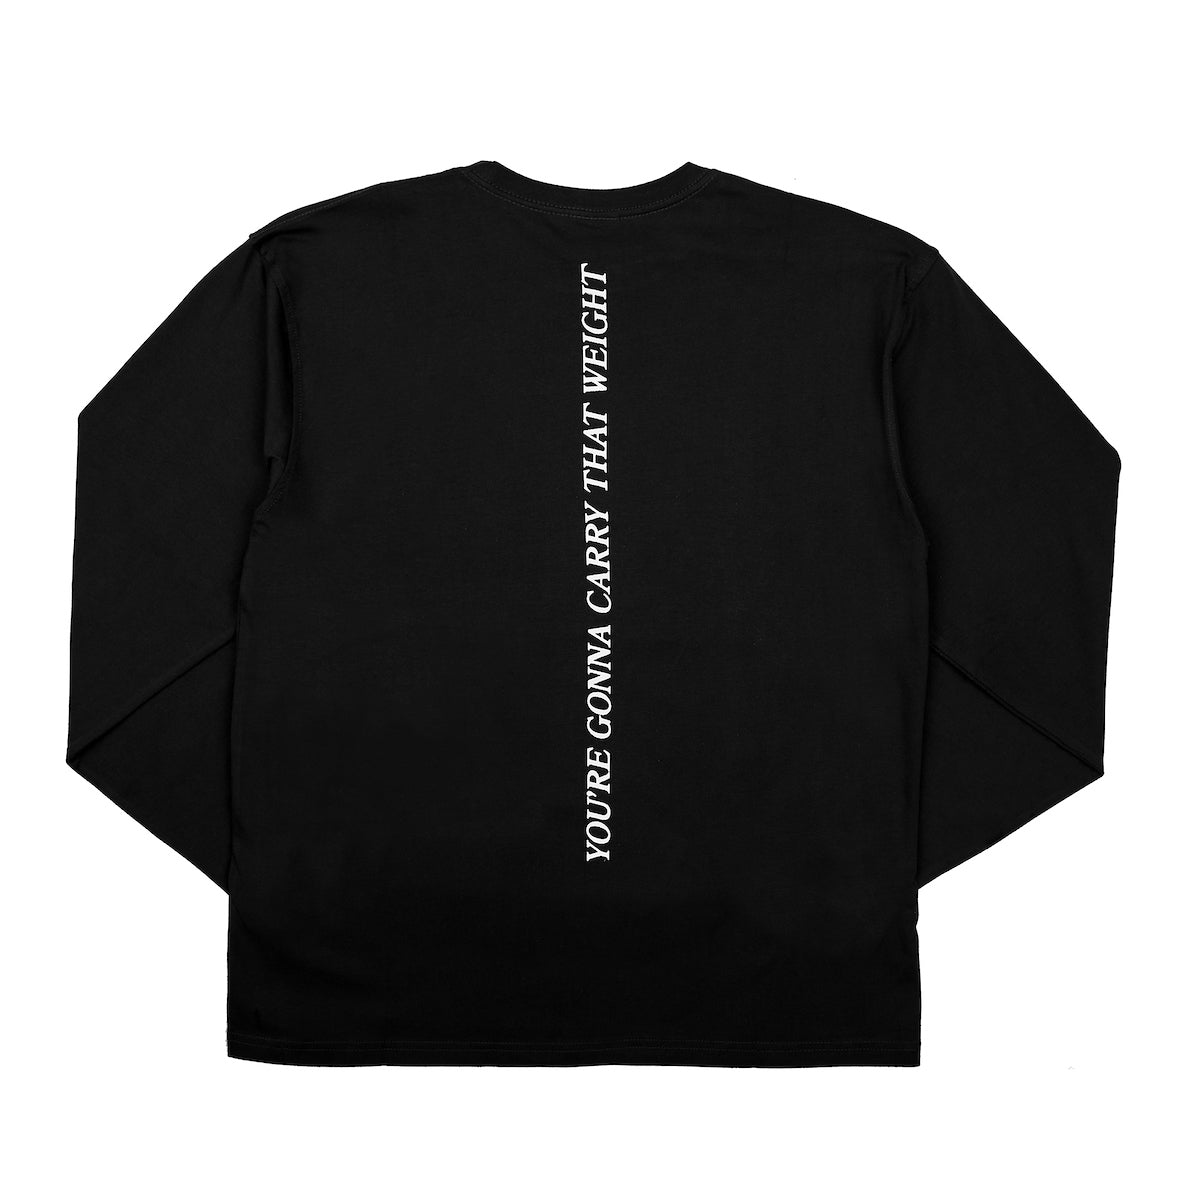 Carry That Weight Black Long Sleeve